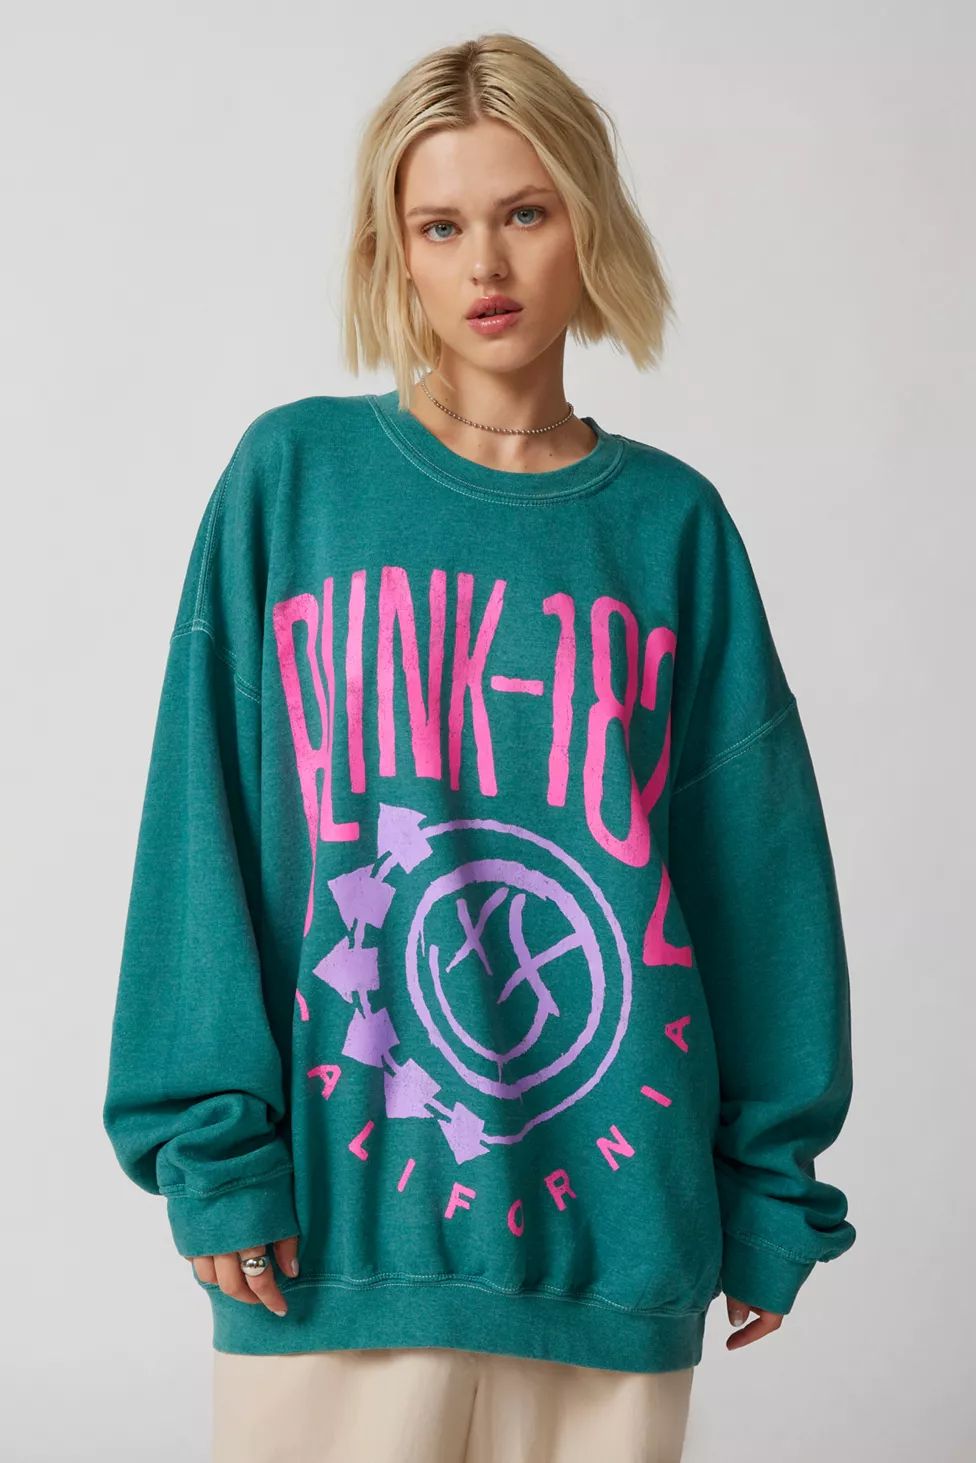 Blink 182 Punk Rock Sweatshirt | Urban Outfitters (US and RoW)